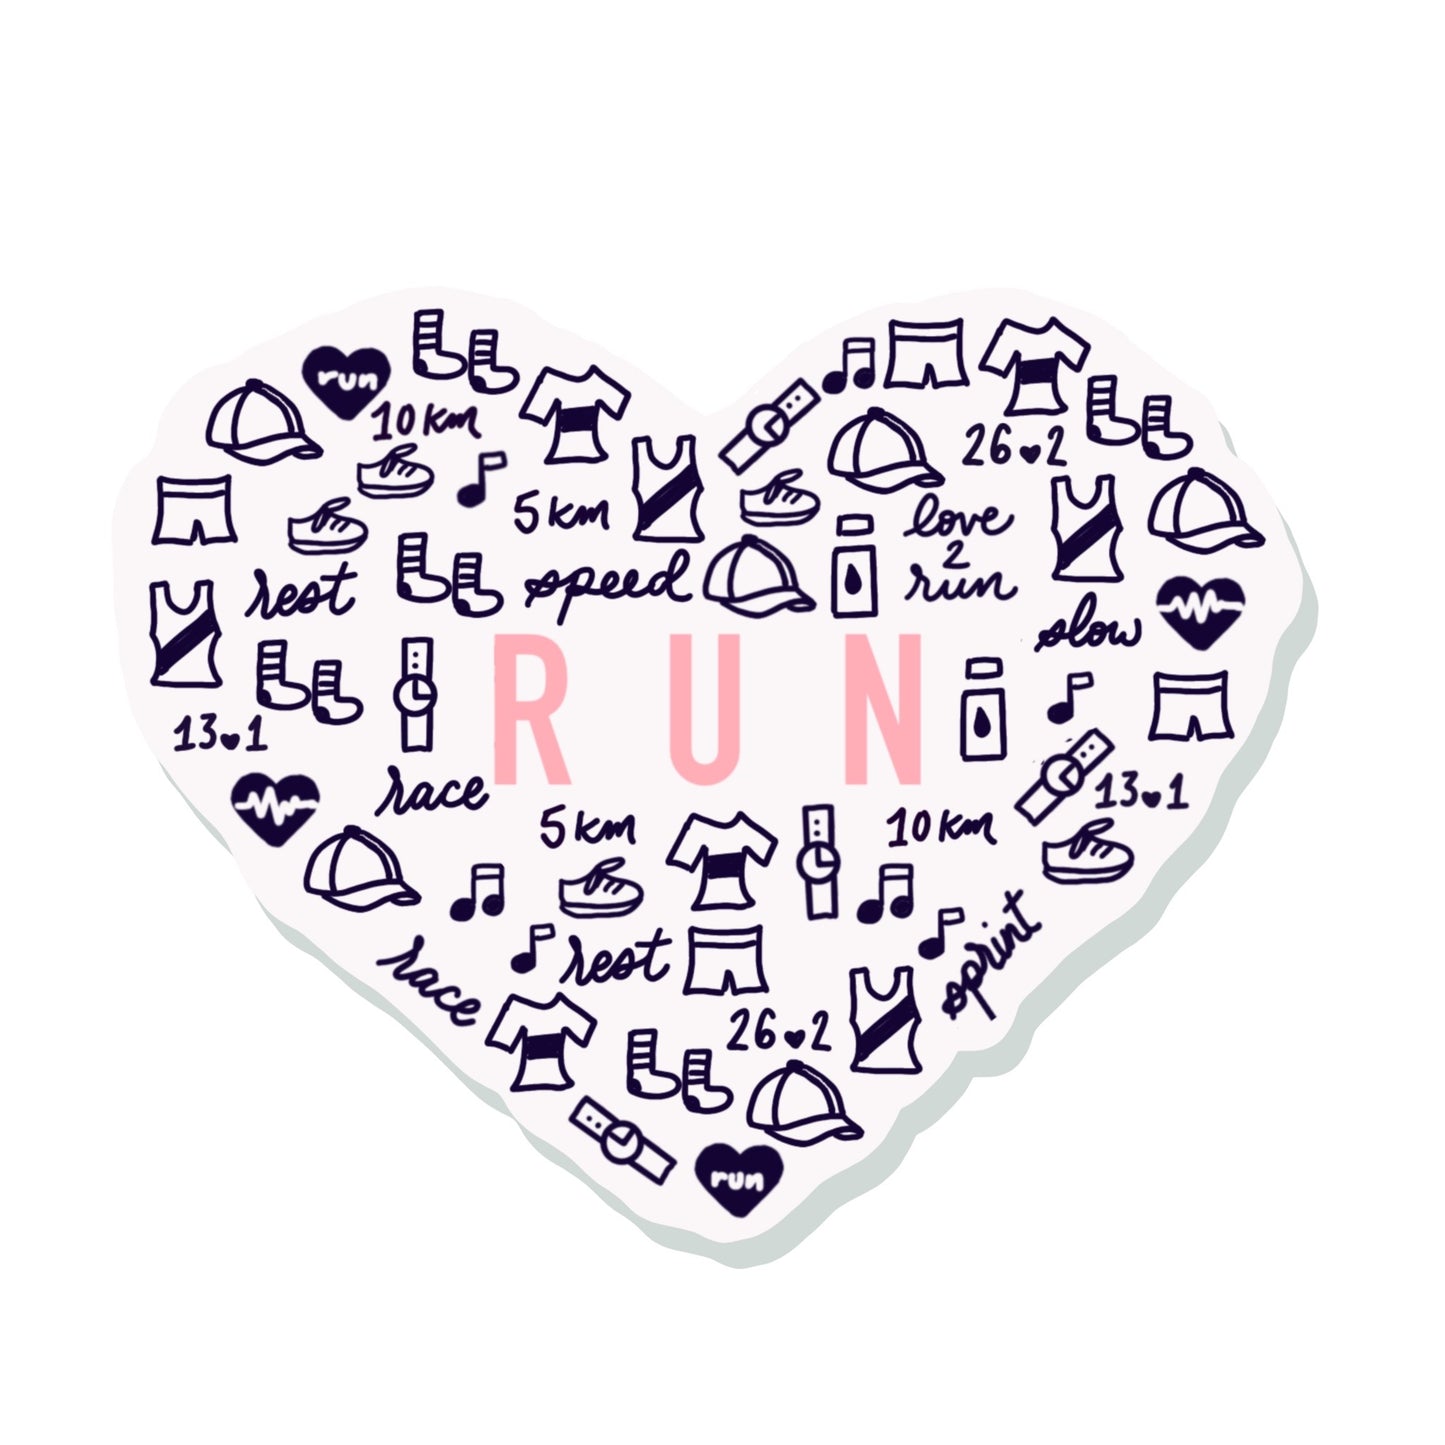 All the things I love about running sticker, Run sticker with little icons, Run heart sticker